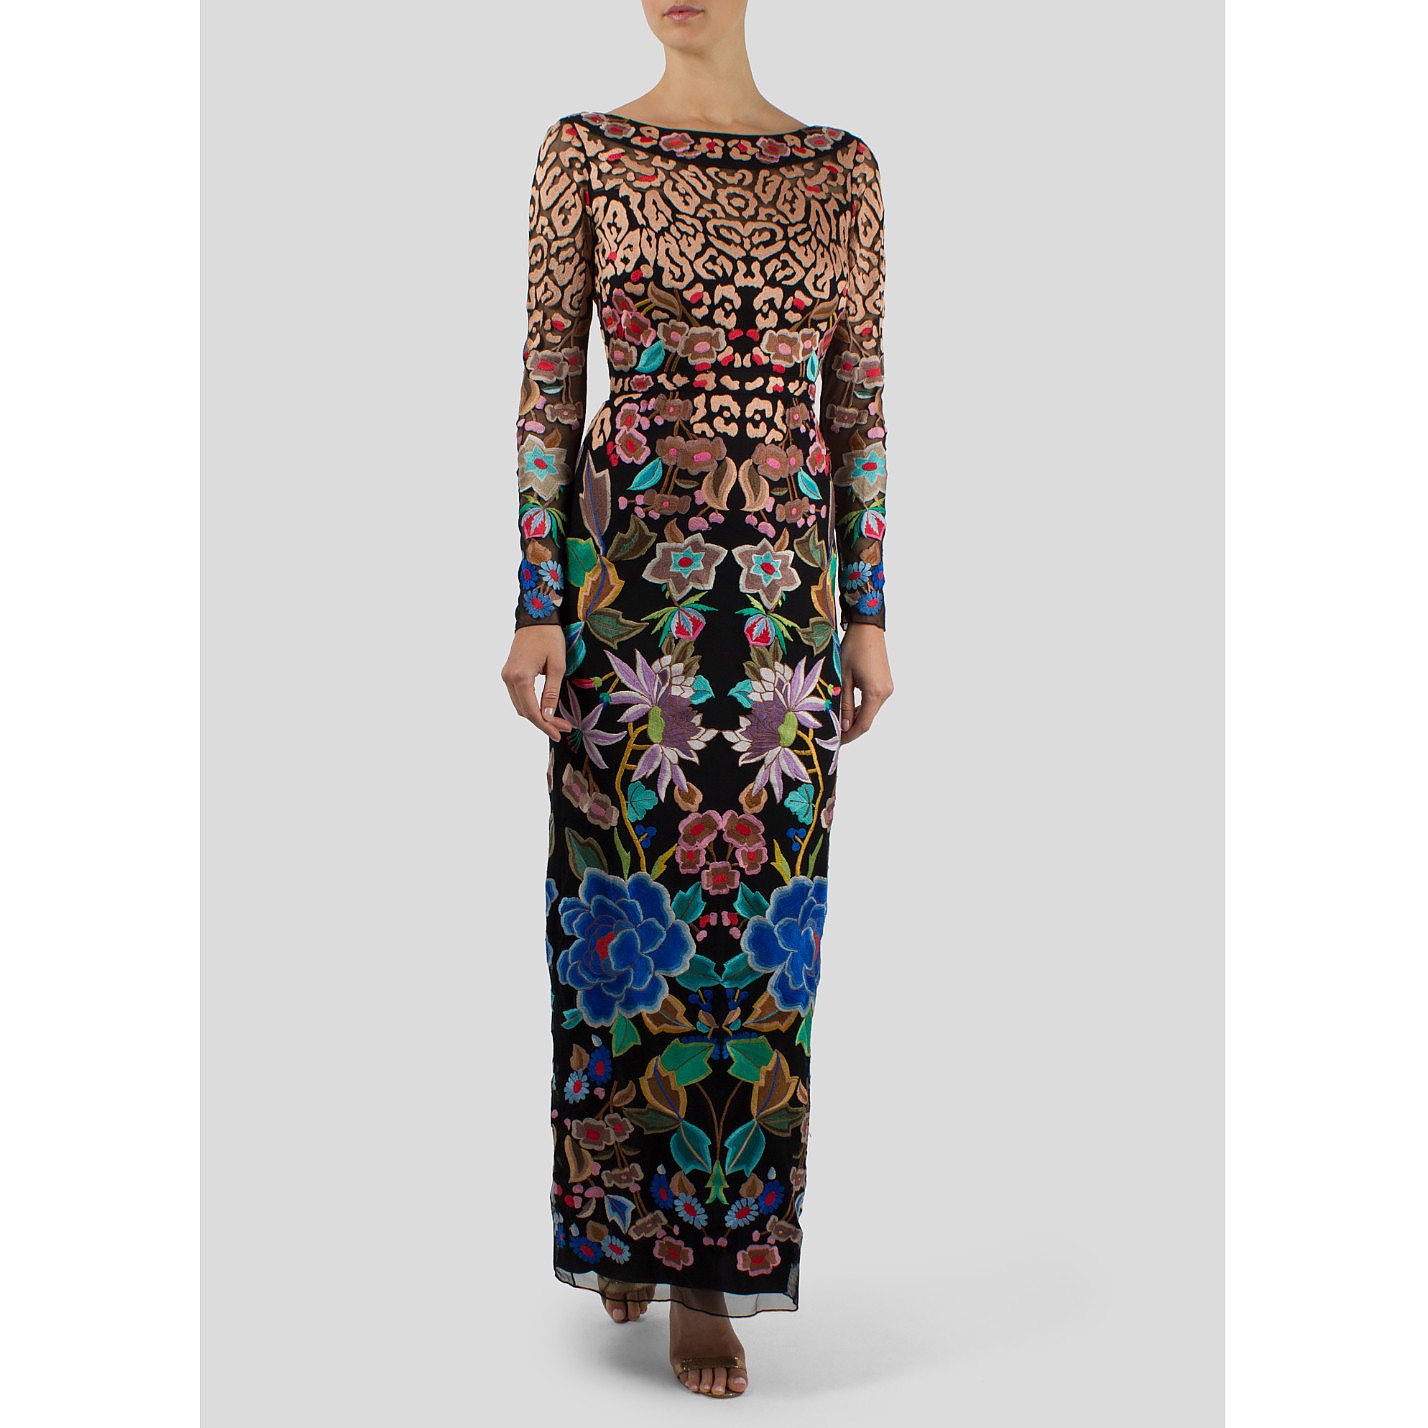 Temperley London Floral Embroidered Dress